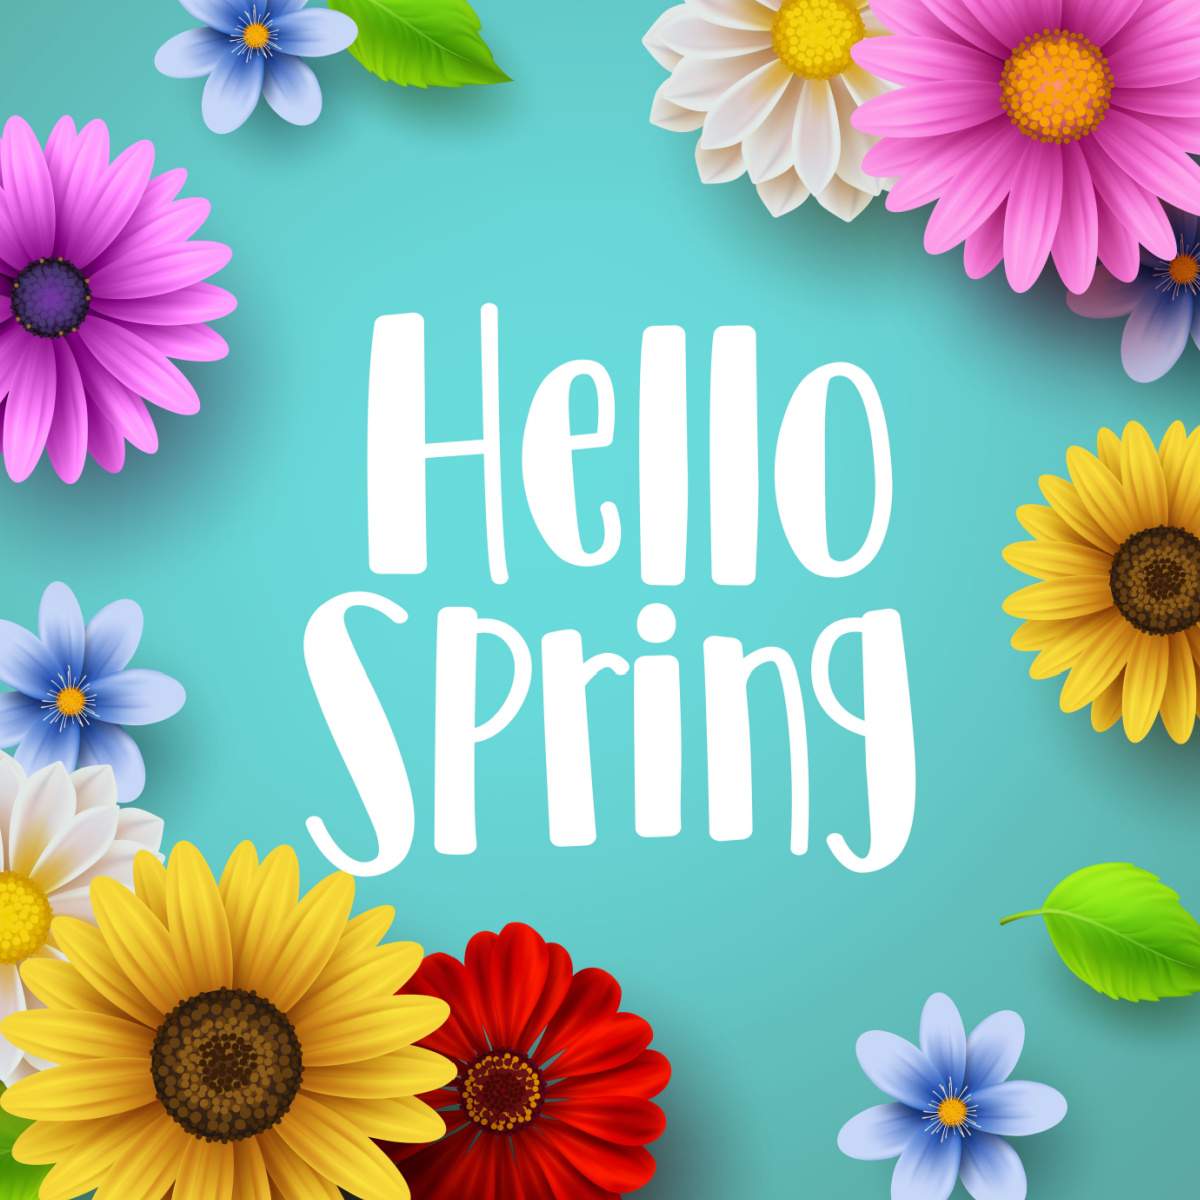 A teal background with the words "Hello Spring" in the center, surrounded by a border of spring flowers like sunflowers and daisies.